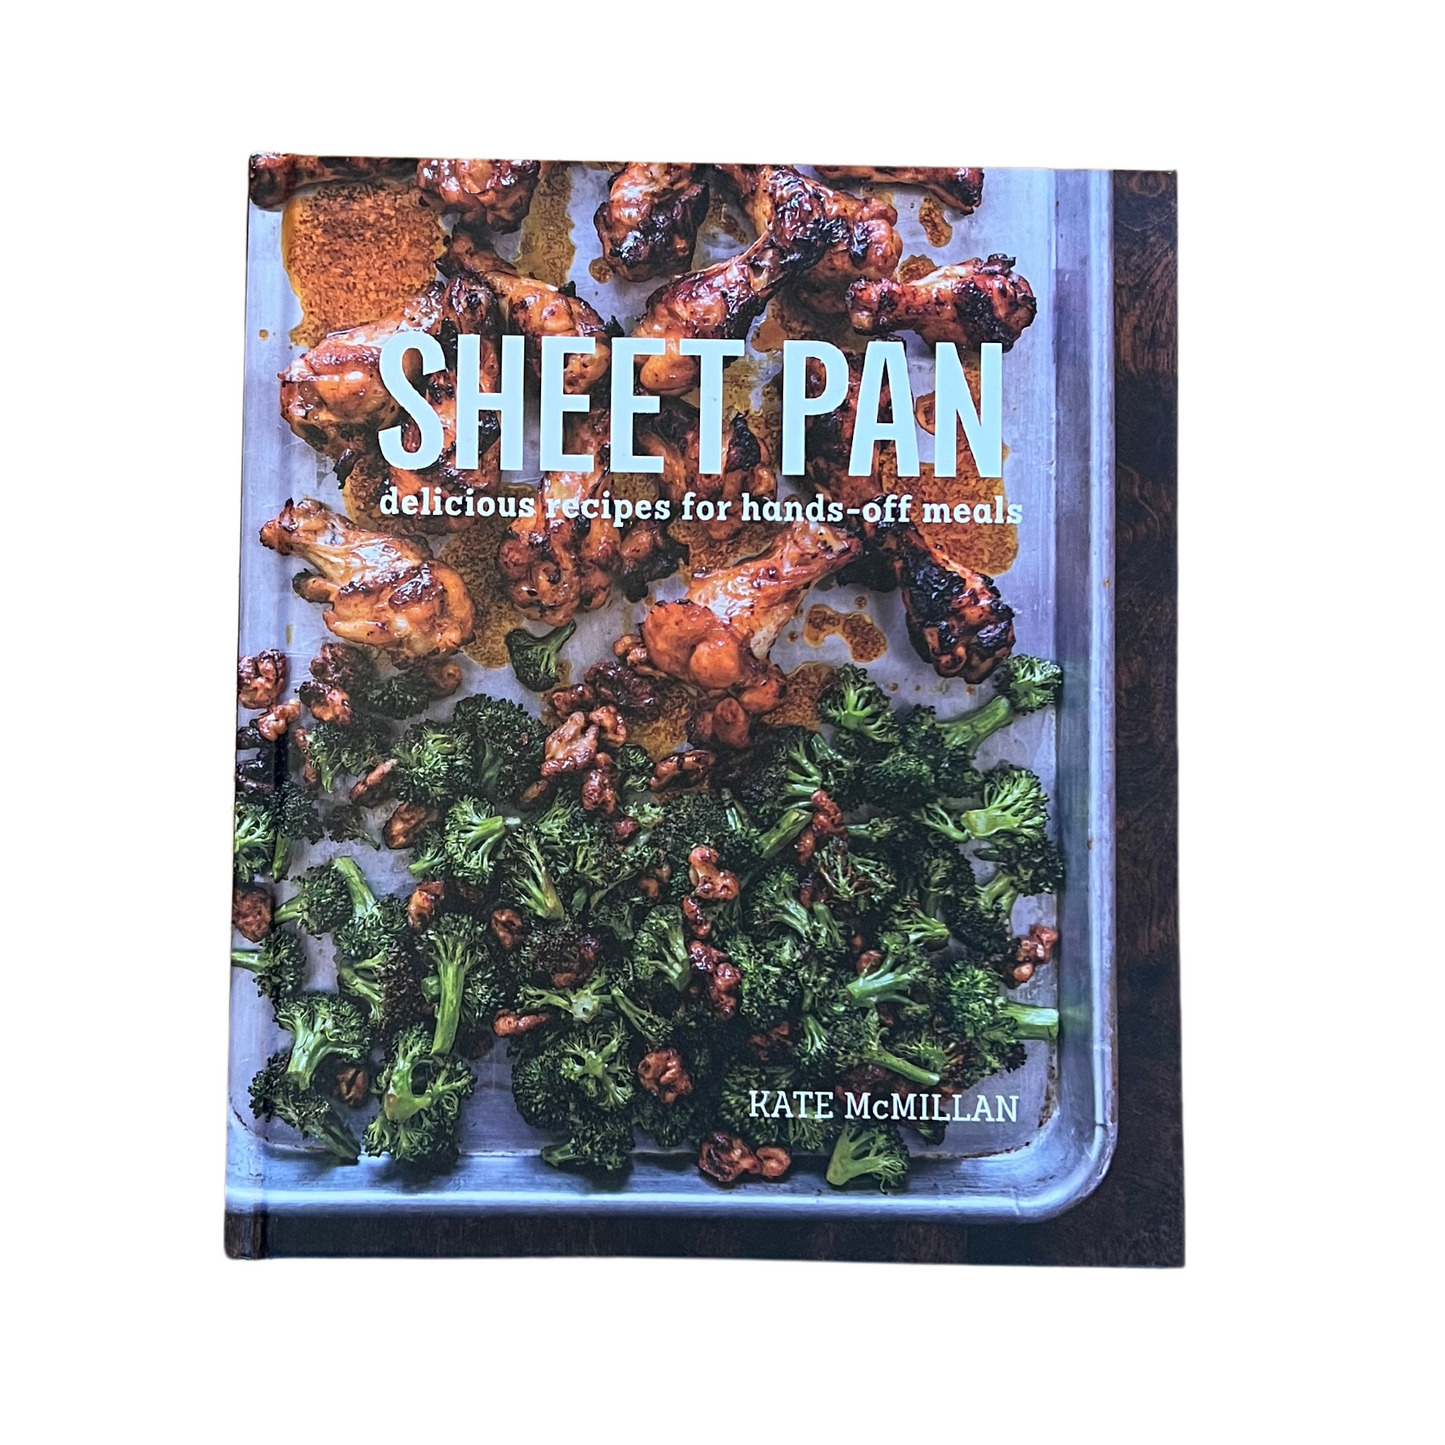 Sheet Pan: Delicious Recipes for Hands-off Meals